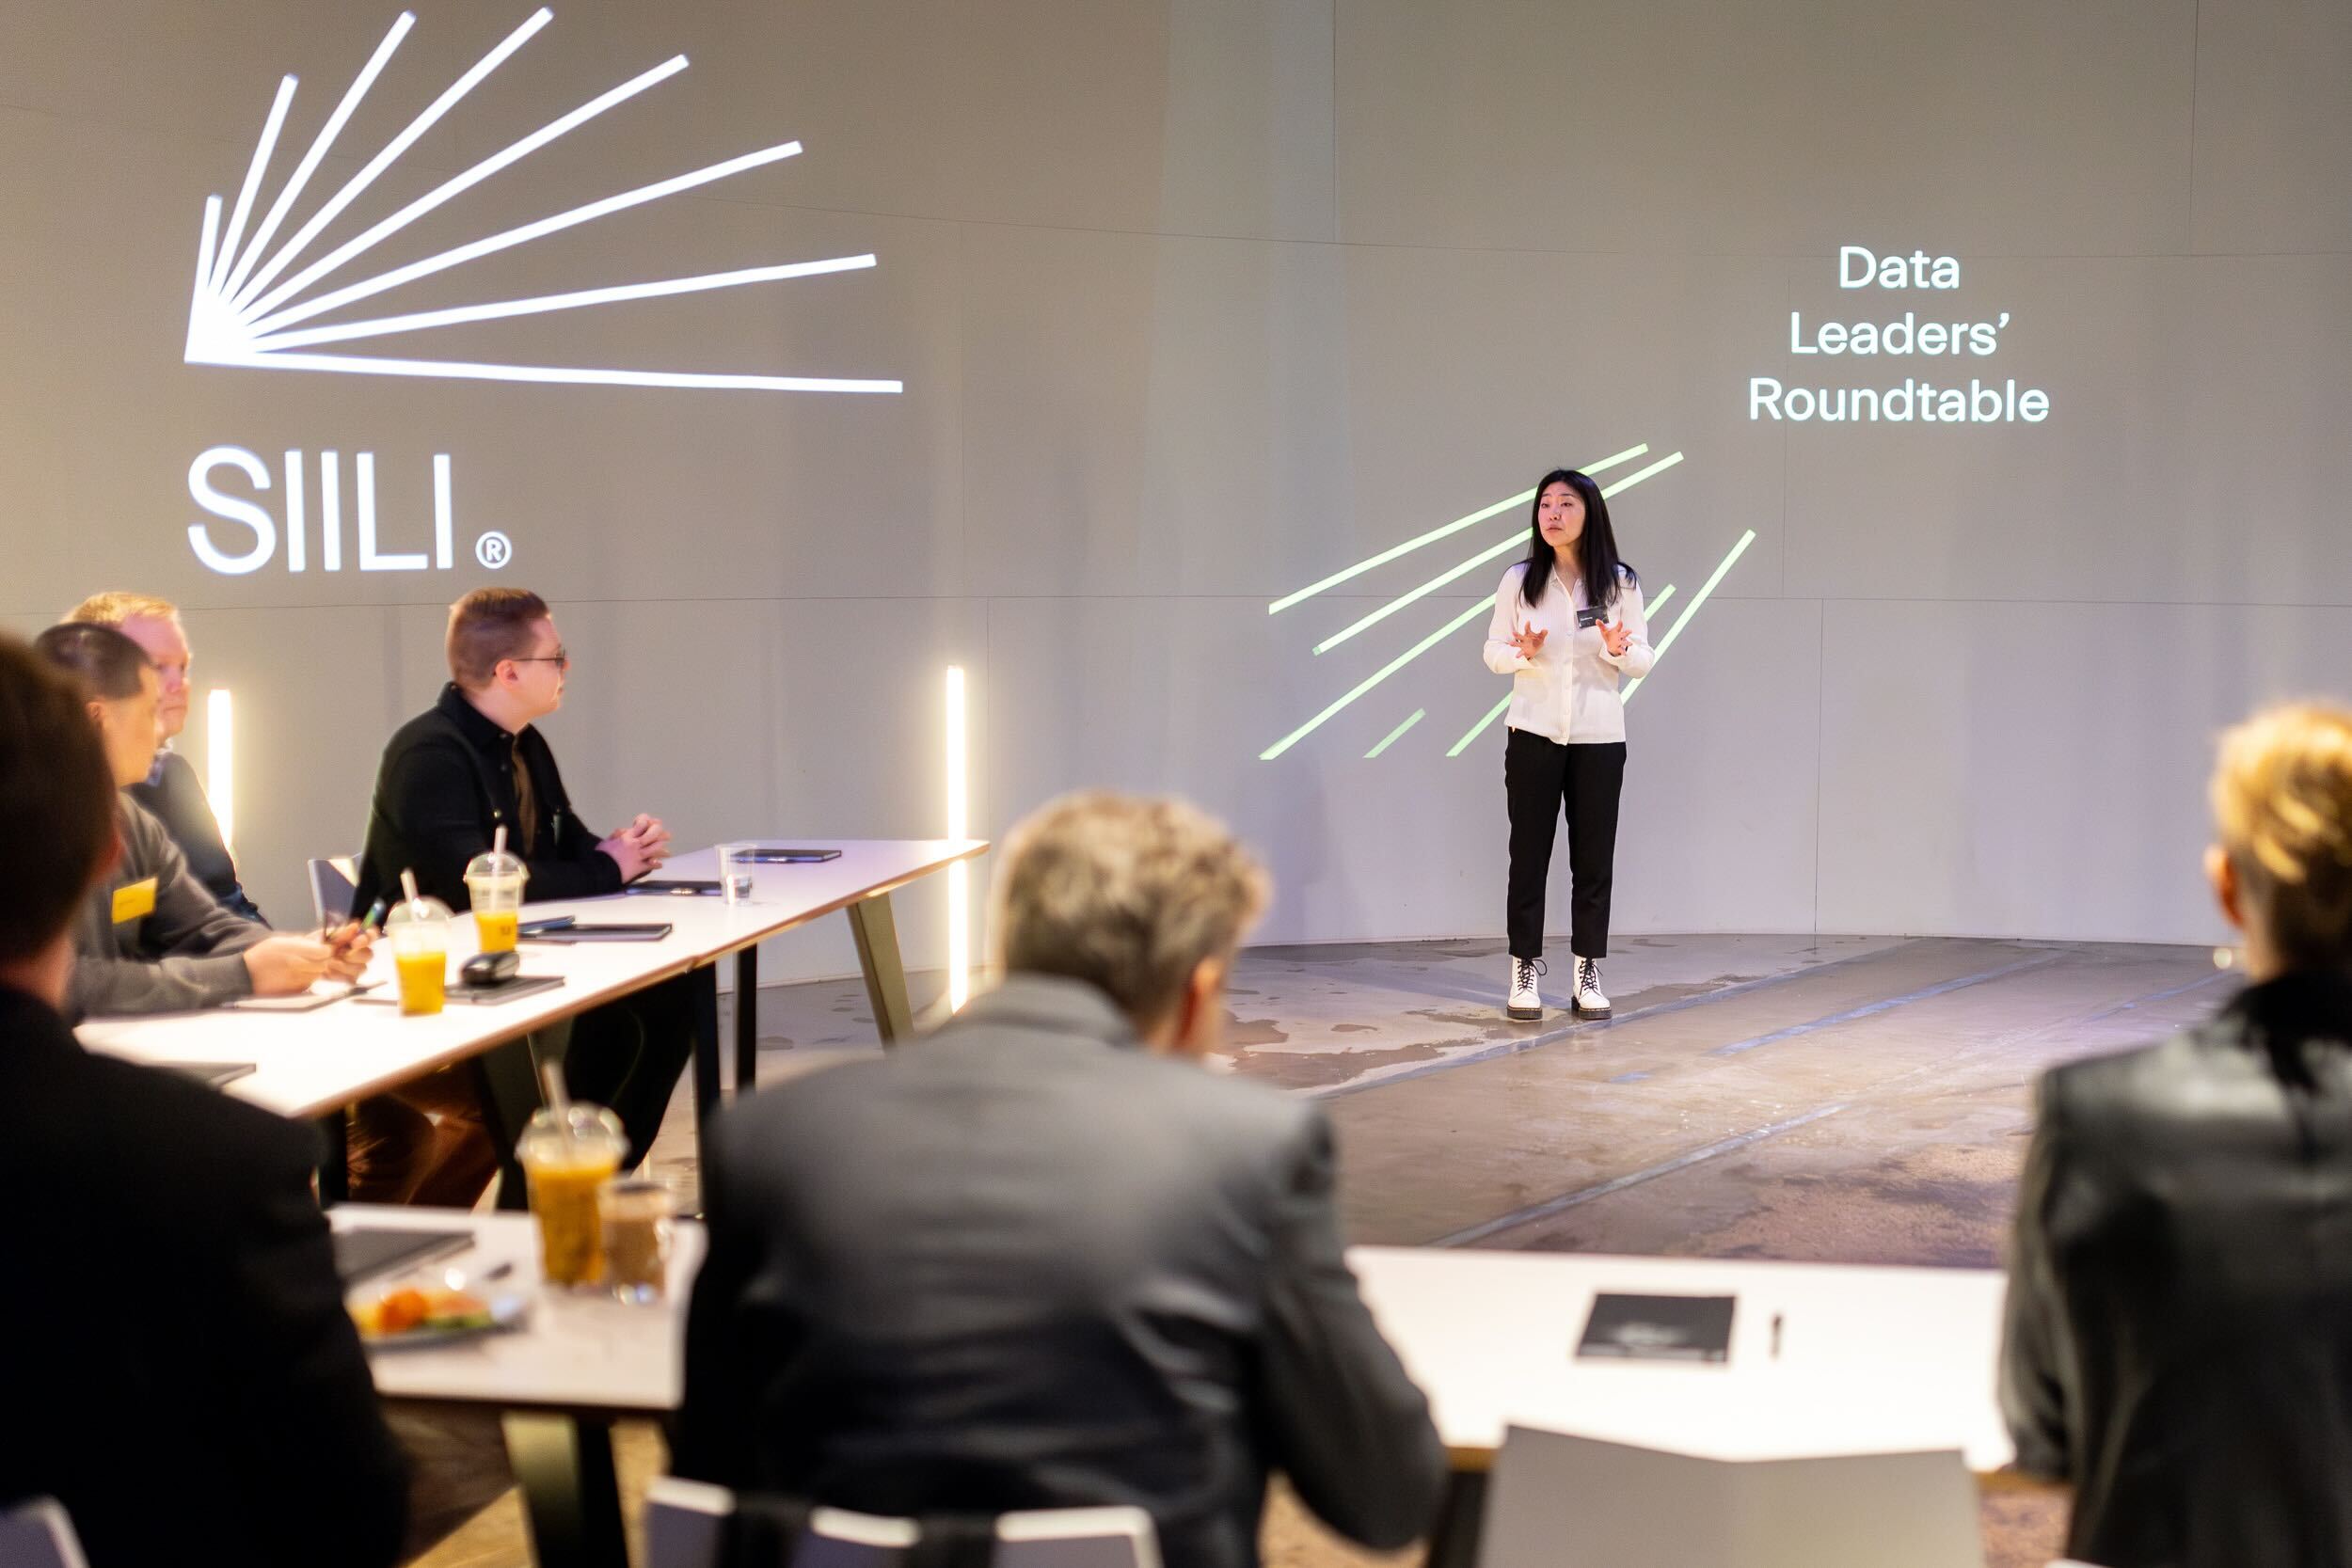 Revisiting the Data Leaders' Roundtable event: Key insights